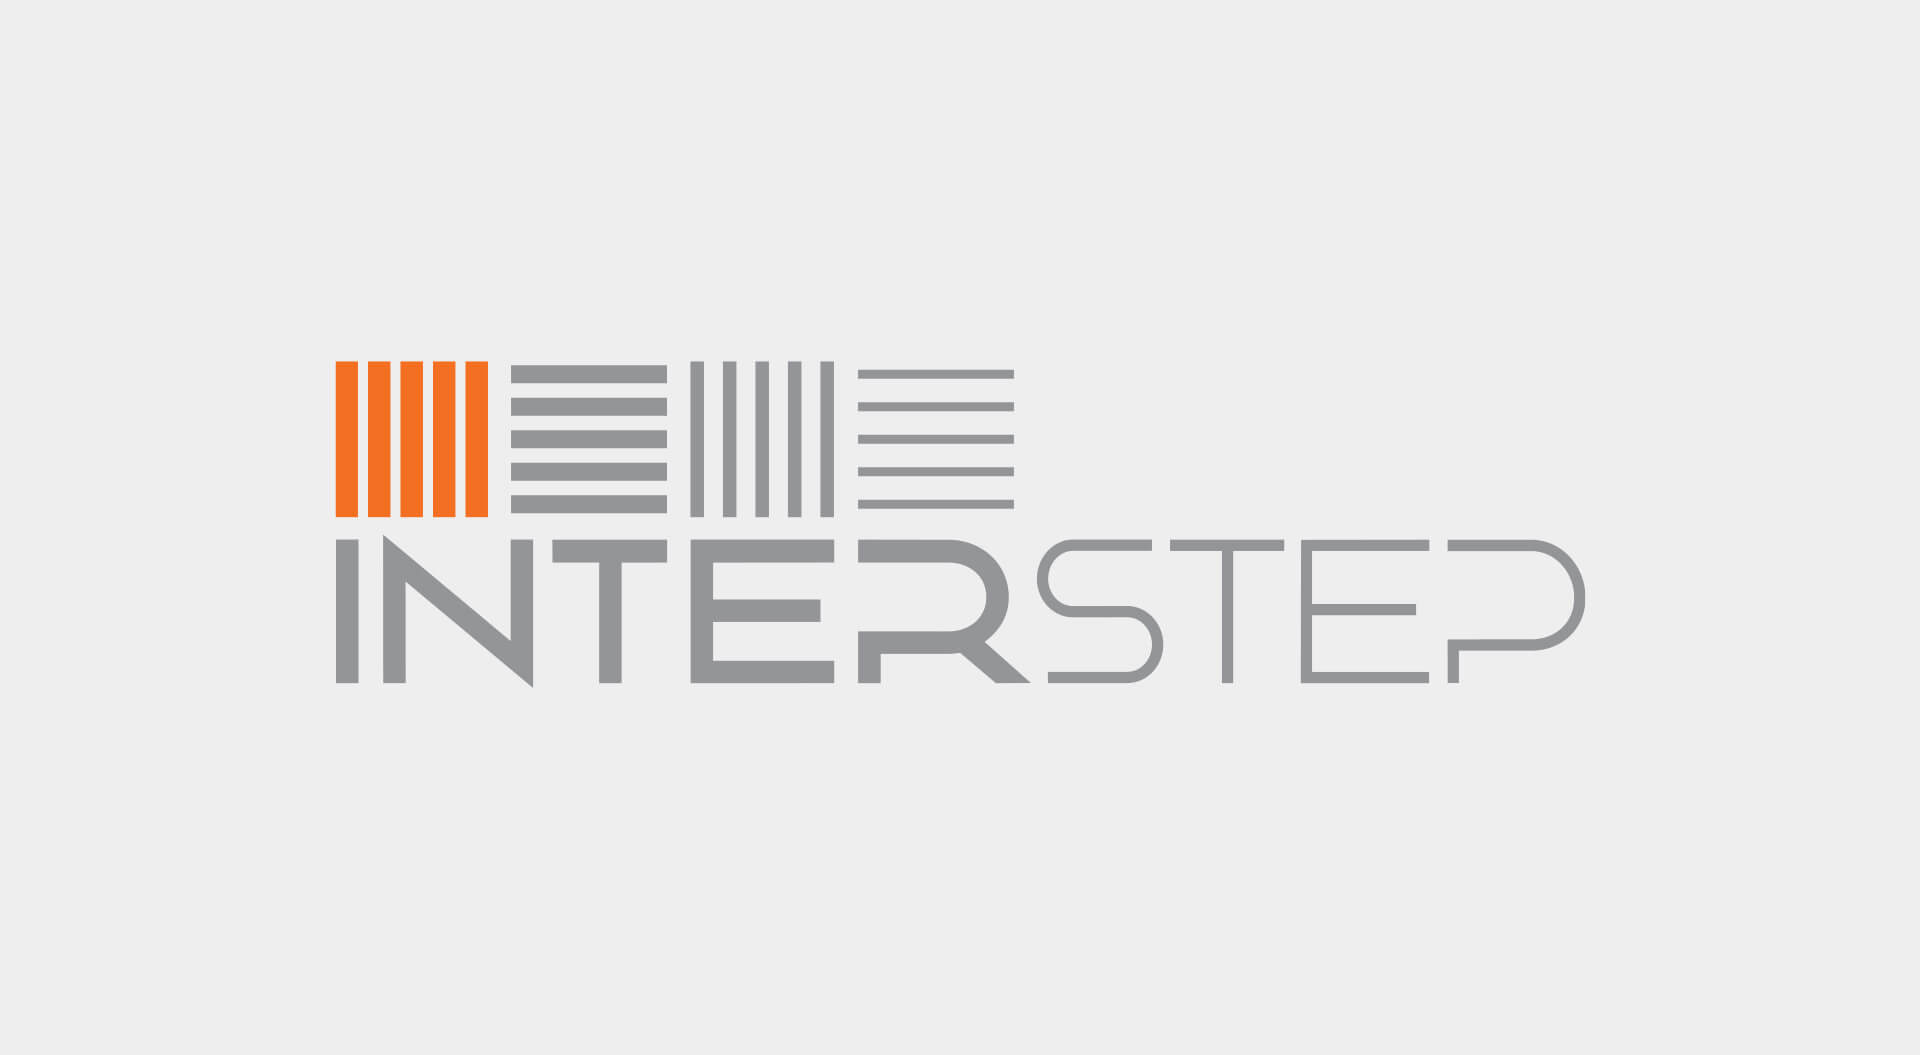 IInterstep Technology rebrand identity of an electronic accessories company 